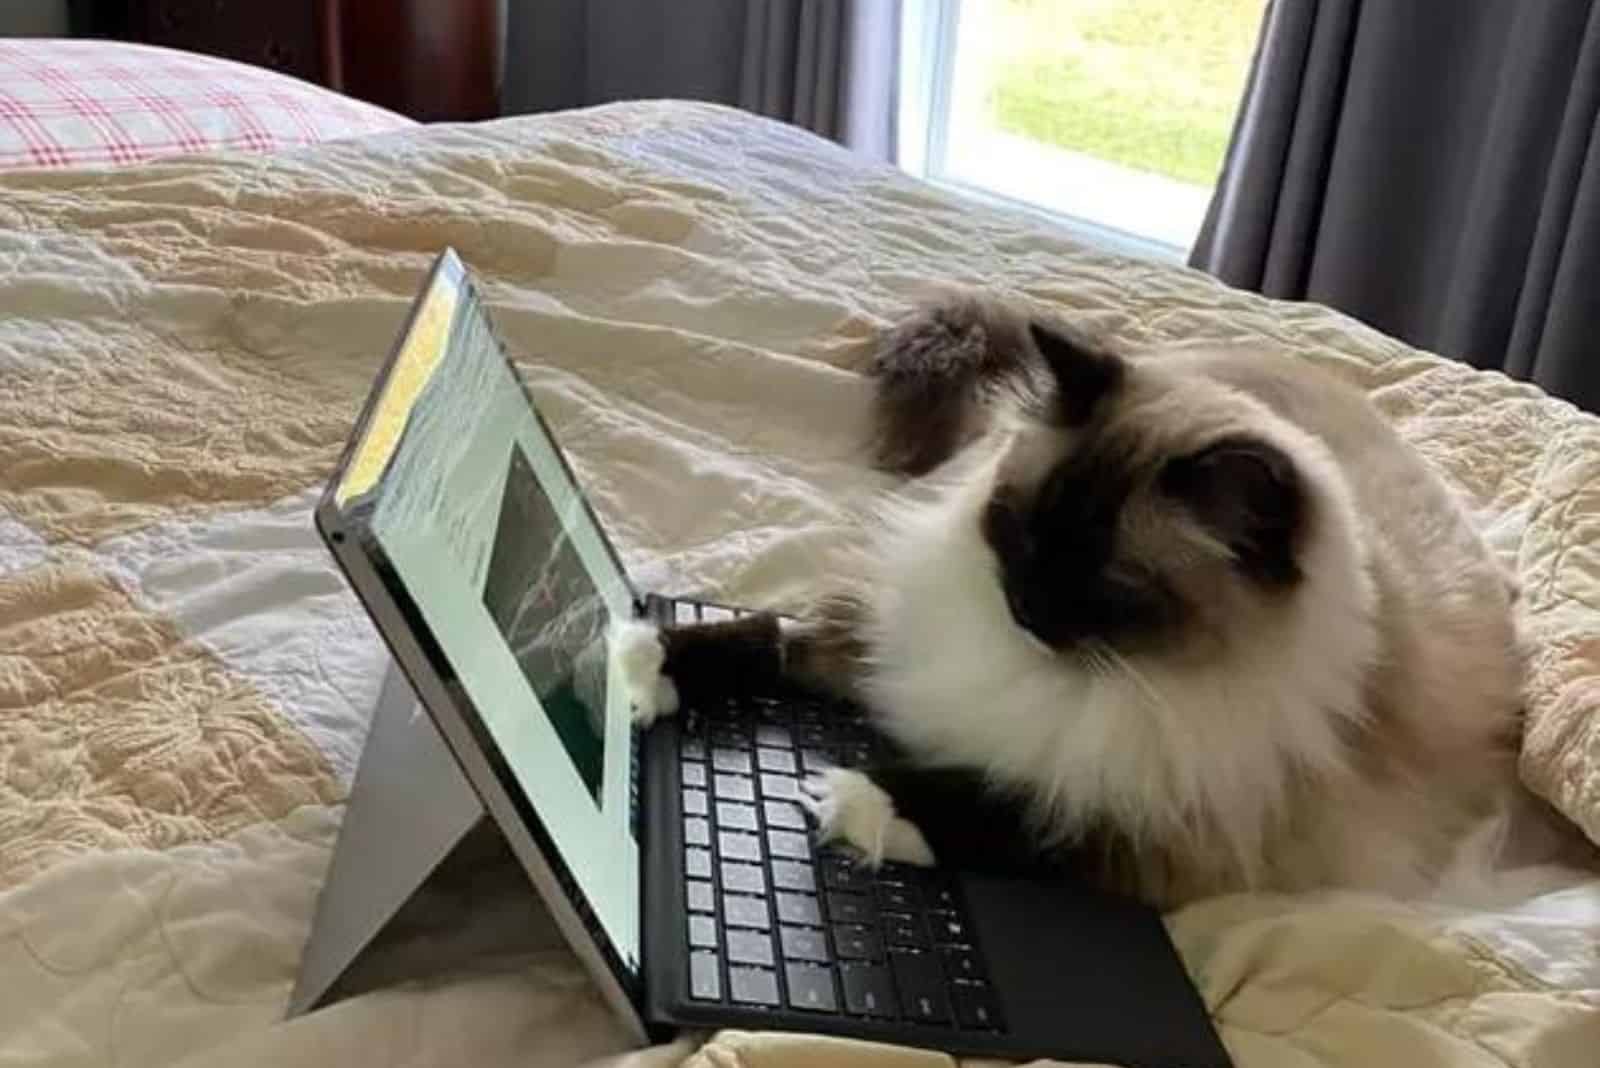 adorable photo of a cat 'typing' on a laptop